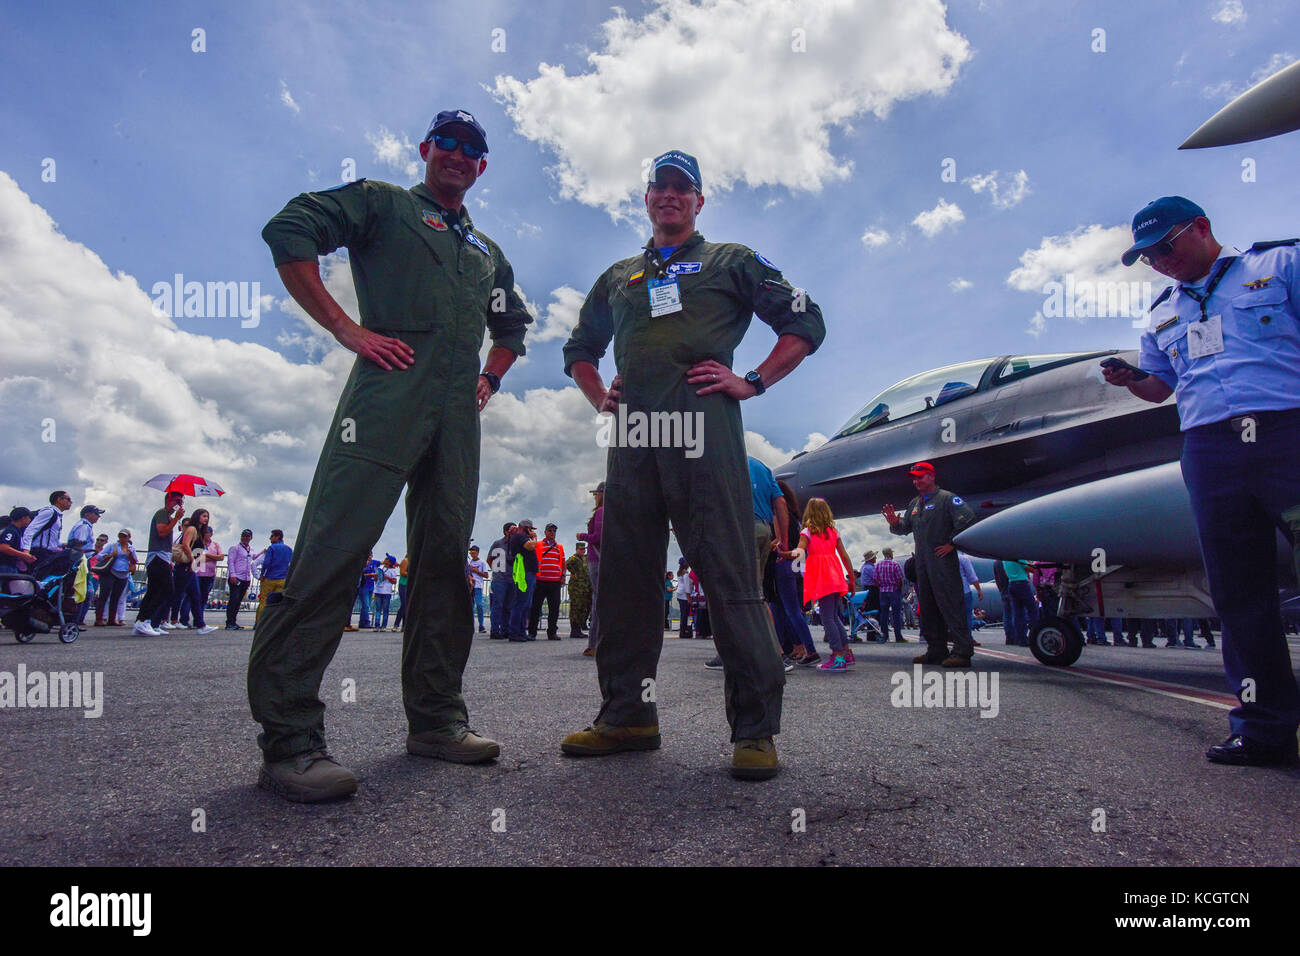 U.S. Air Force Col. Nicholas Gentile, the 169th Fighter Wing Commander, right, and Lt. Col Jeff Beckham, a fighter pilot assigned to the 157th Fighter Squadron, left, pose for a photo at José María Córdova International Airport during F-AIR 2017 in Rionegro, Colombia, July 14, 2017. United States military participation in the air show provides an opportunity to strengthen our military-to-military relationships with regional partners and provides the opportunity to meet with our Colombian air force counterparts and facilitate interoperability, which can be exercised in future cooperation events Stock Photo